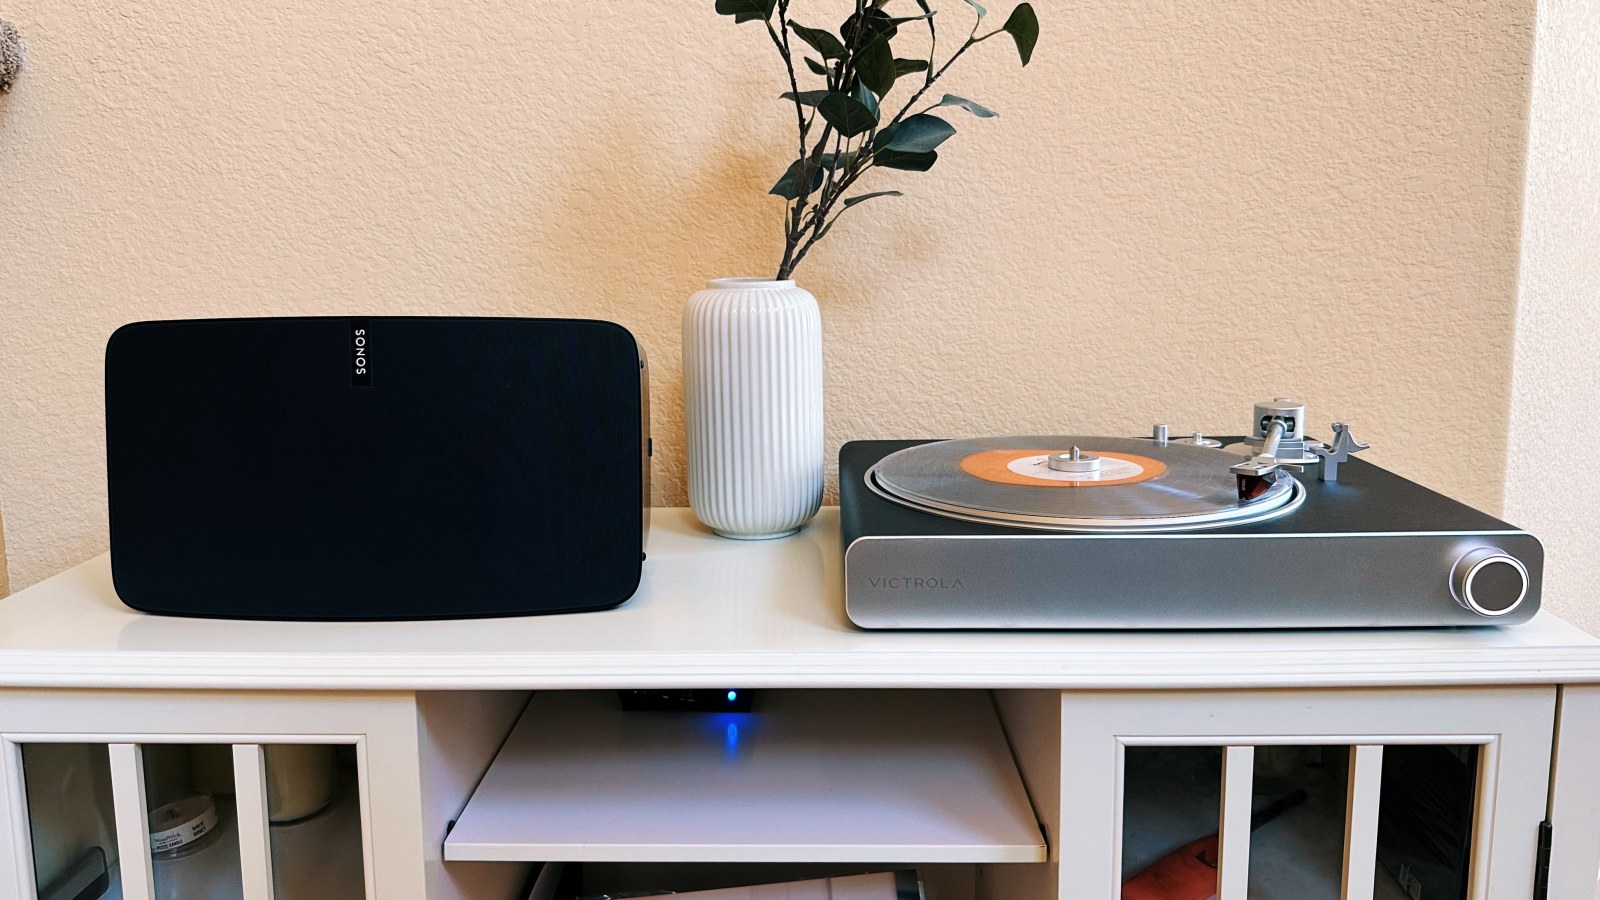 manuskript boykot ammunition Review: Victrola Stream Carbon Is a Wireless Turntable Made for Sonos